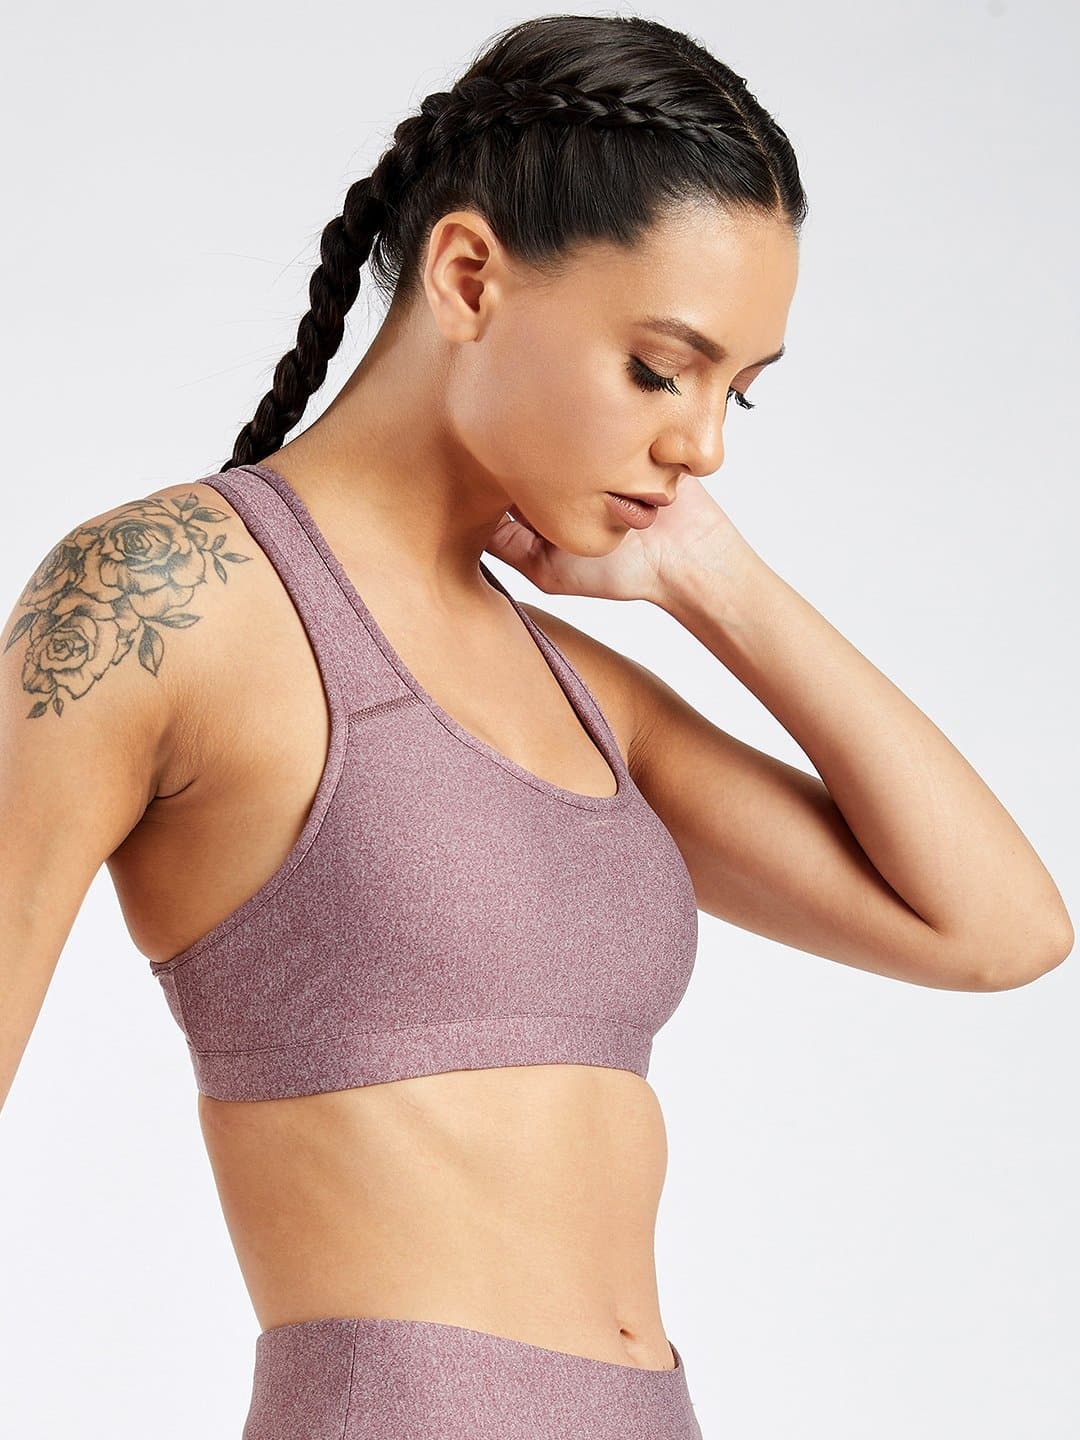 Maxtreme Active Mellow Rose Sports Bra